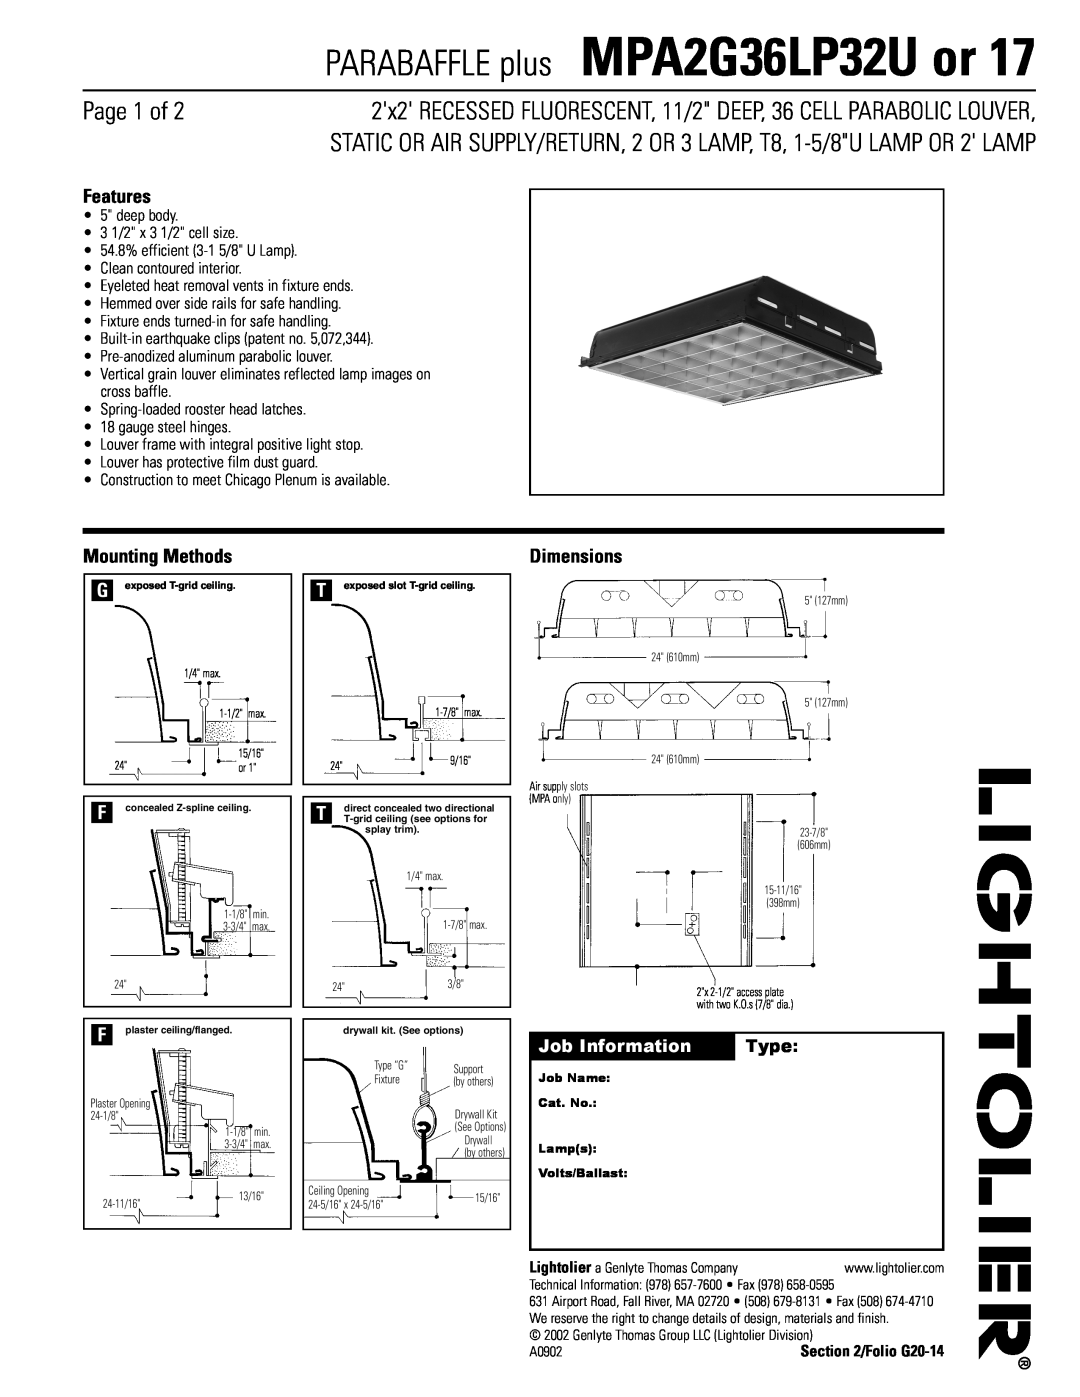 Lightolier dimensions Page 1 of, Features, Mounting Methods, Dimensions, PARABAFFLE plus MPA2G36LP32U or 